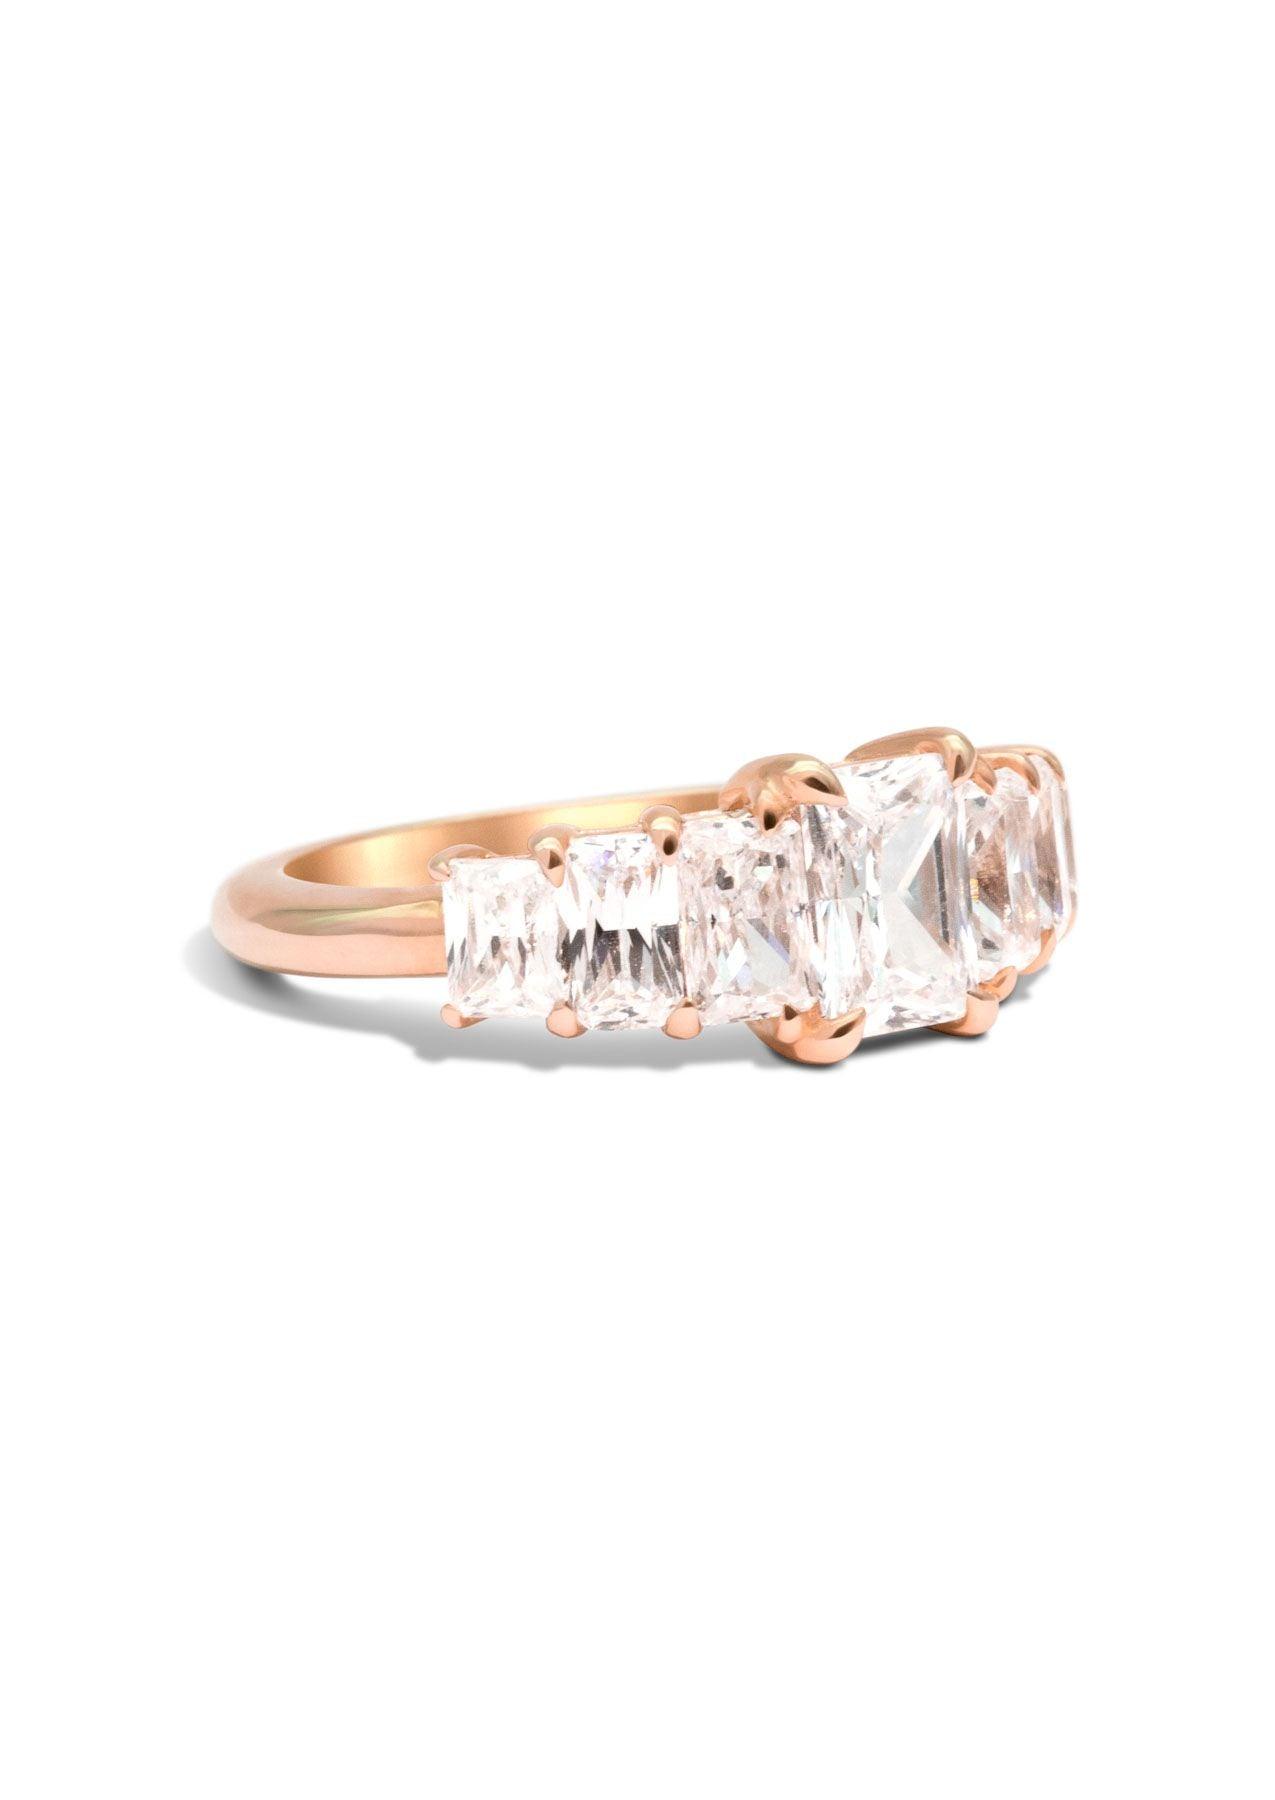 The Radiant Banks Rose Gold Cultured Diamond Ring - Molten Store